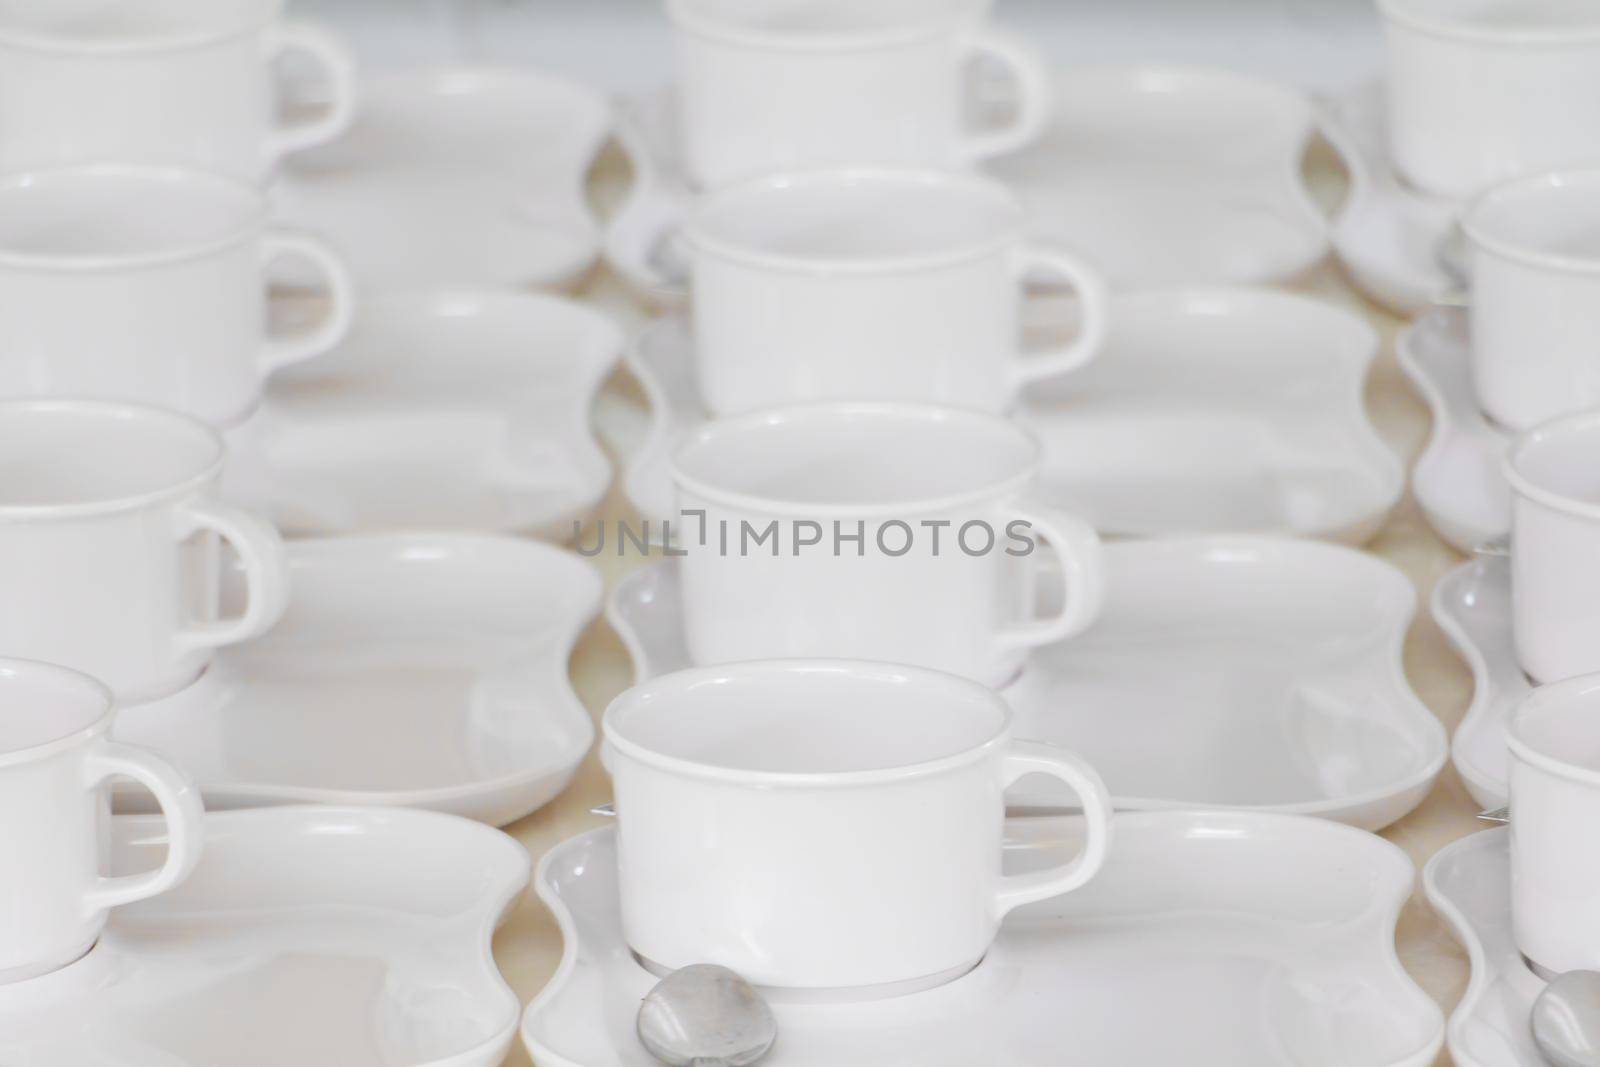 white coffee cup row with saucer and spoon on table